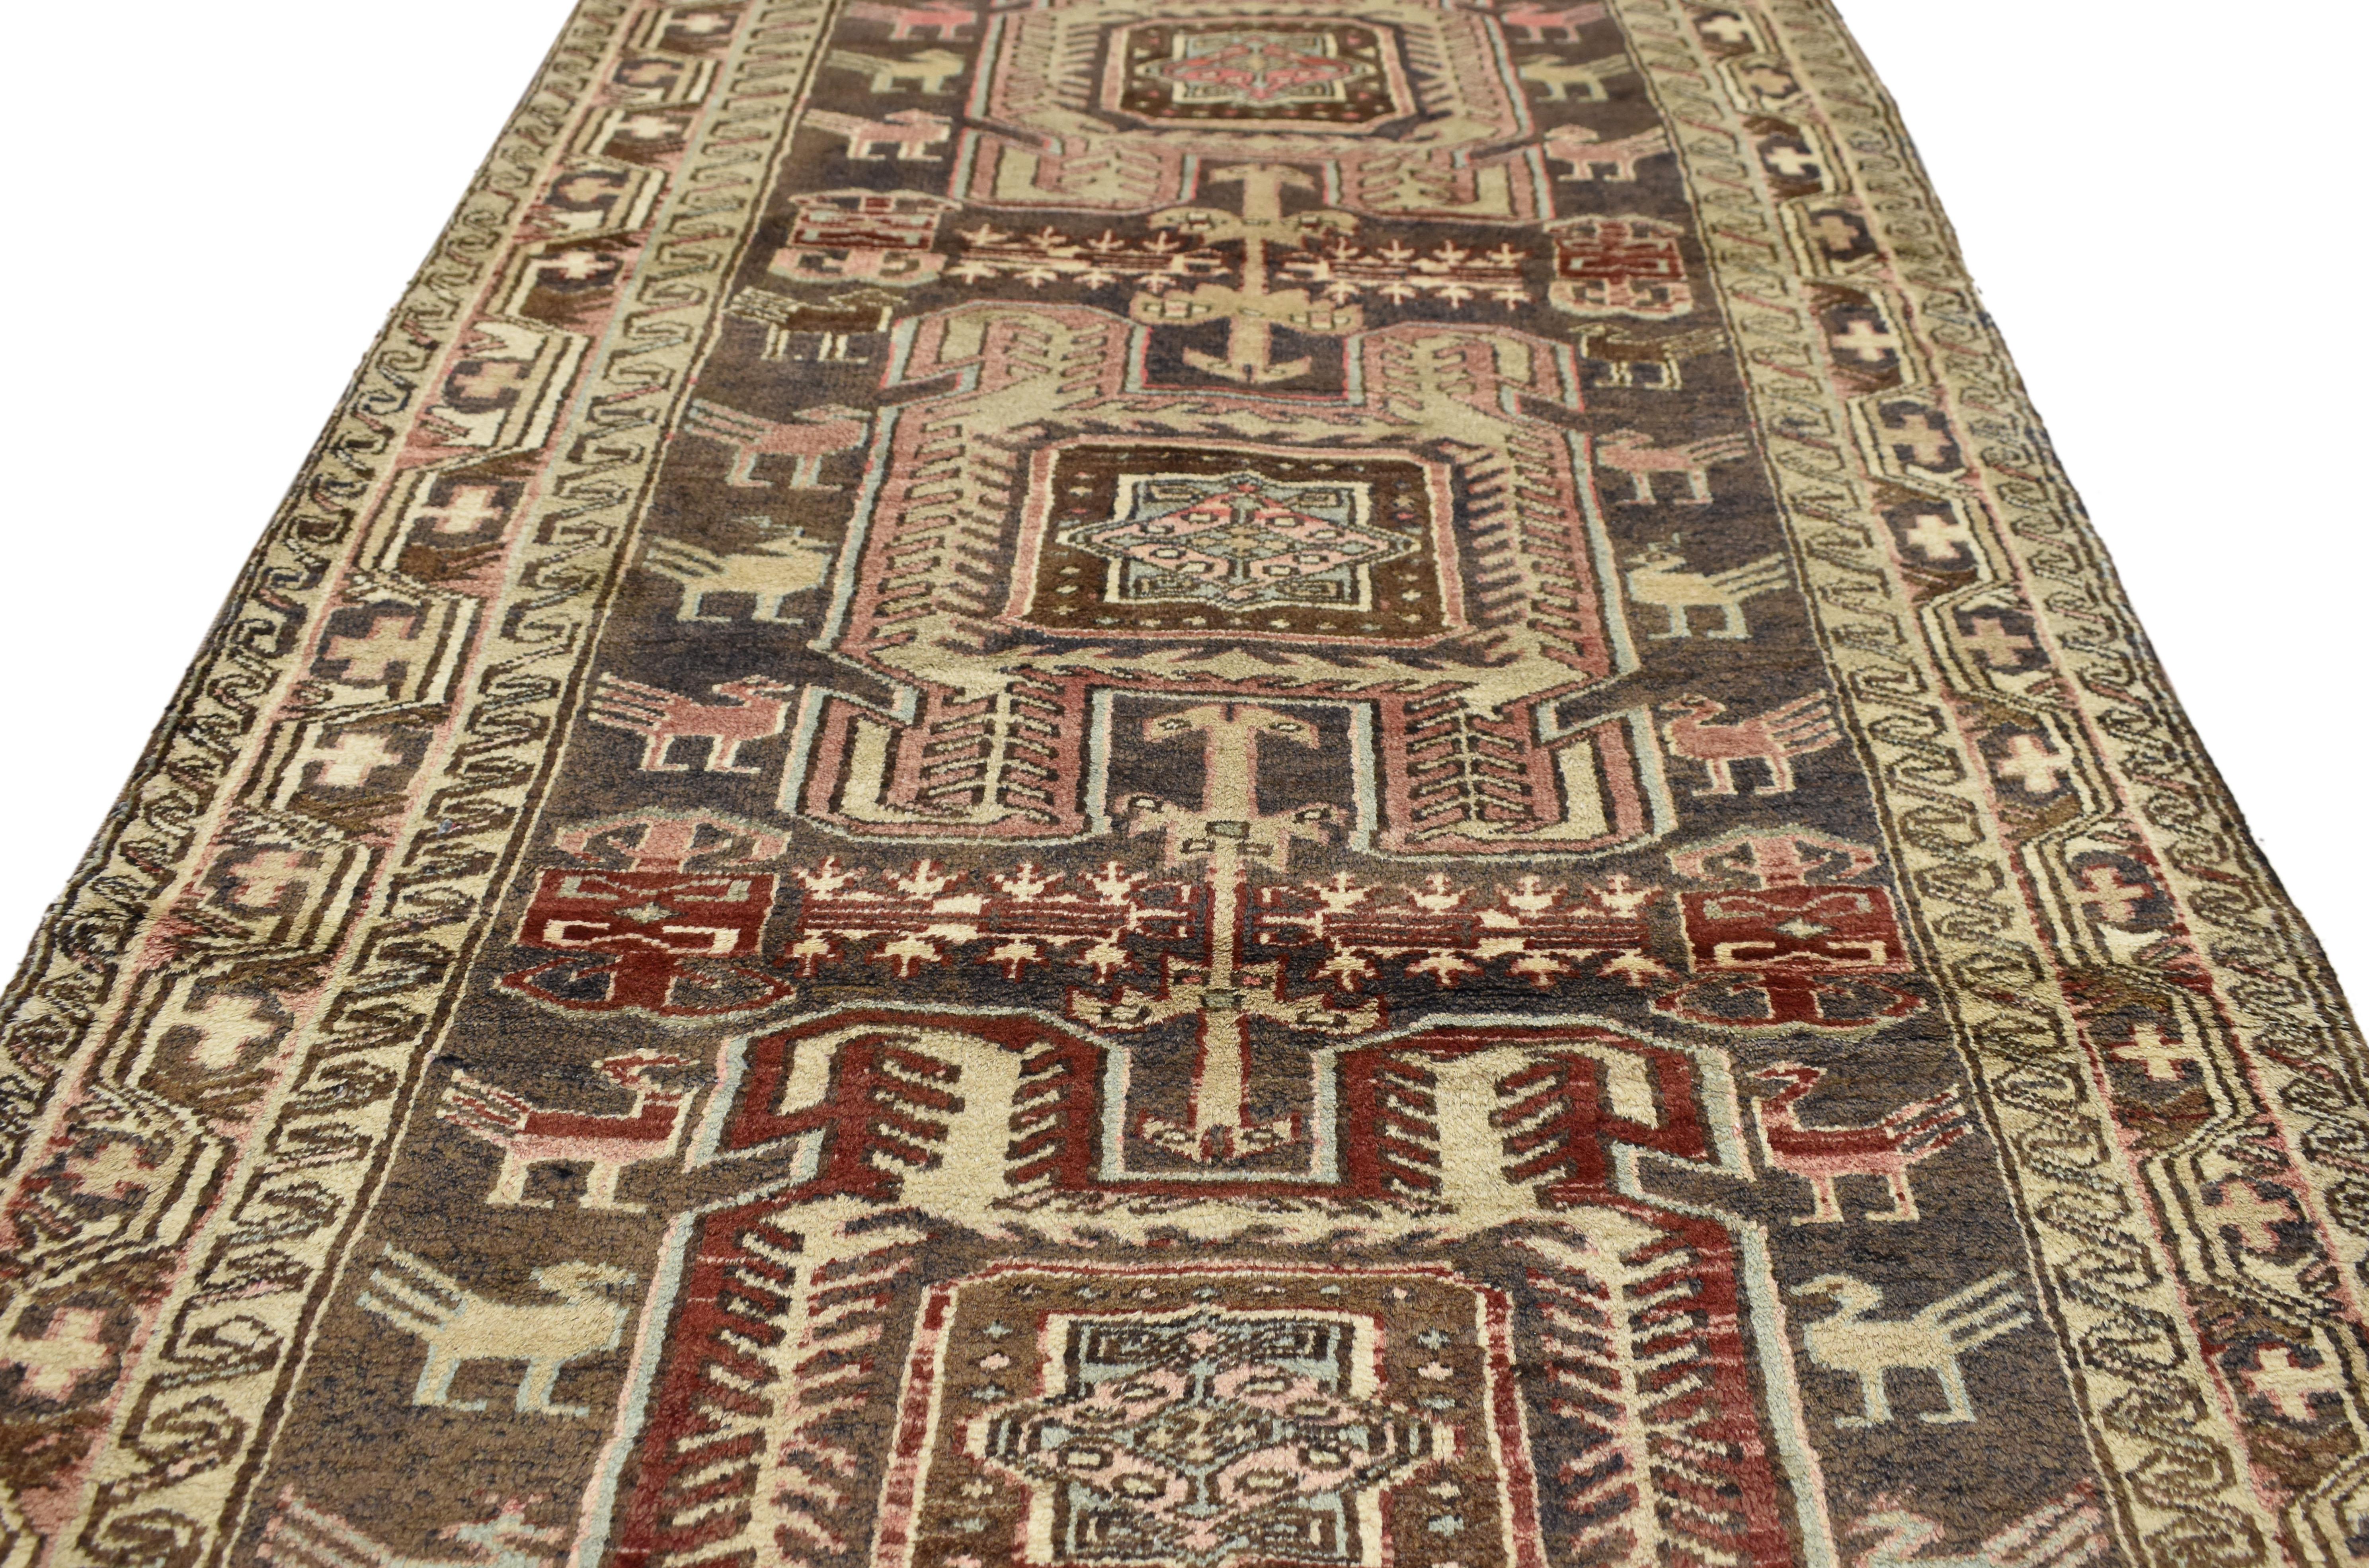 76524 rustic style vintage Persian Azerbaijan tribal runner, wide hallway runner. Whimsical and tribal, this hand knotted wool vintage Persian Azerbaijan runner features a curious all-over pattern of abstract birds among its geometric forms. The